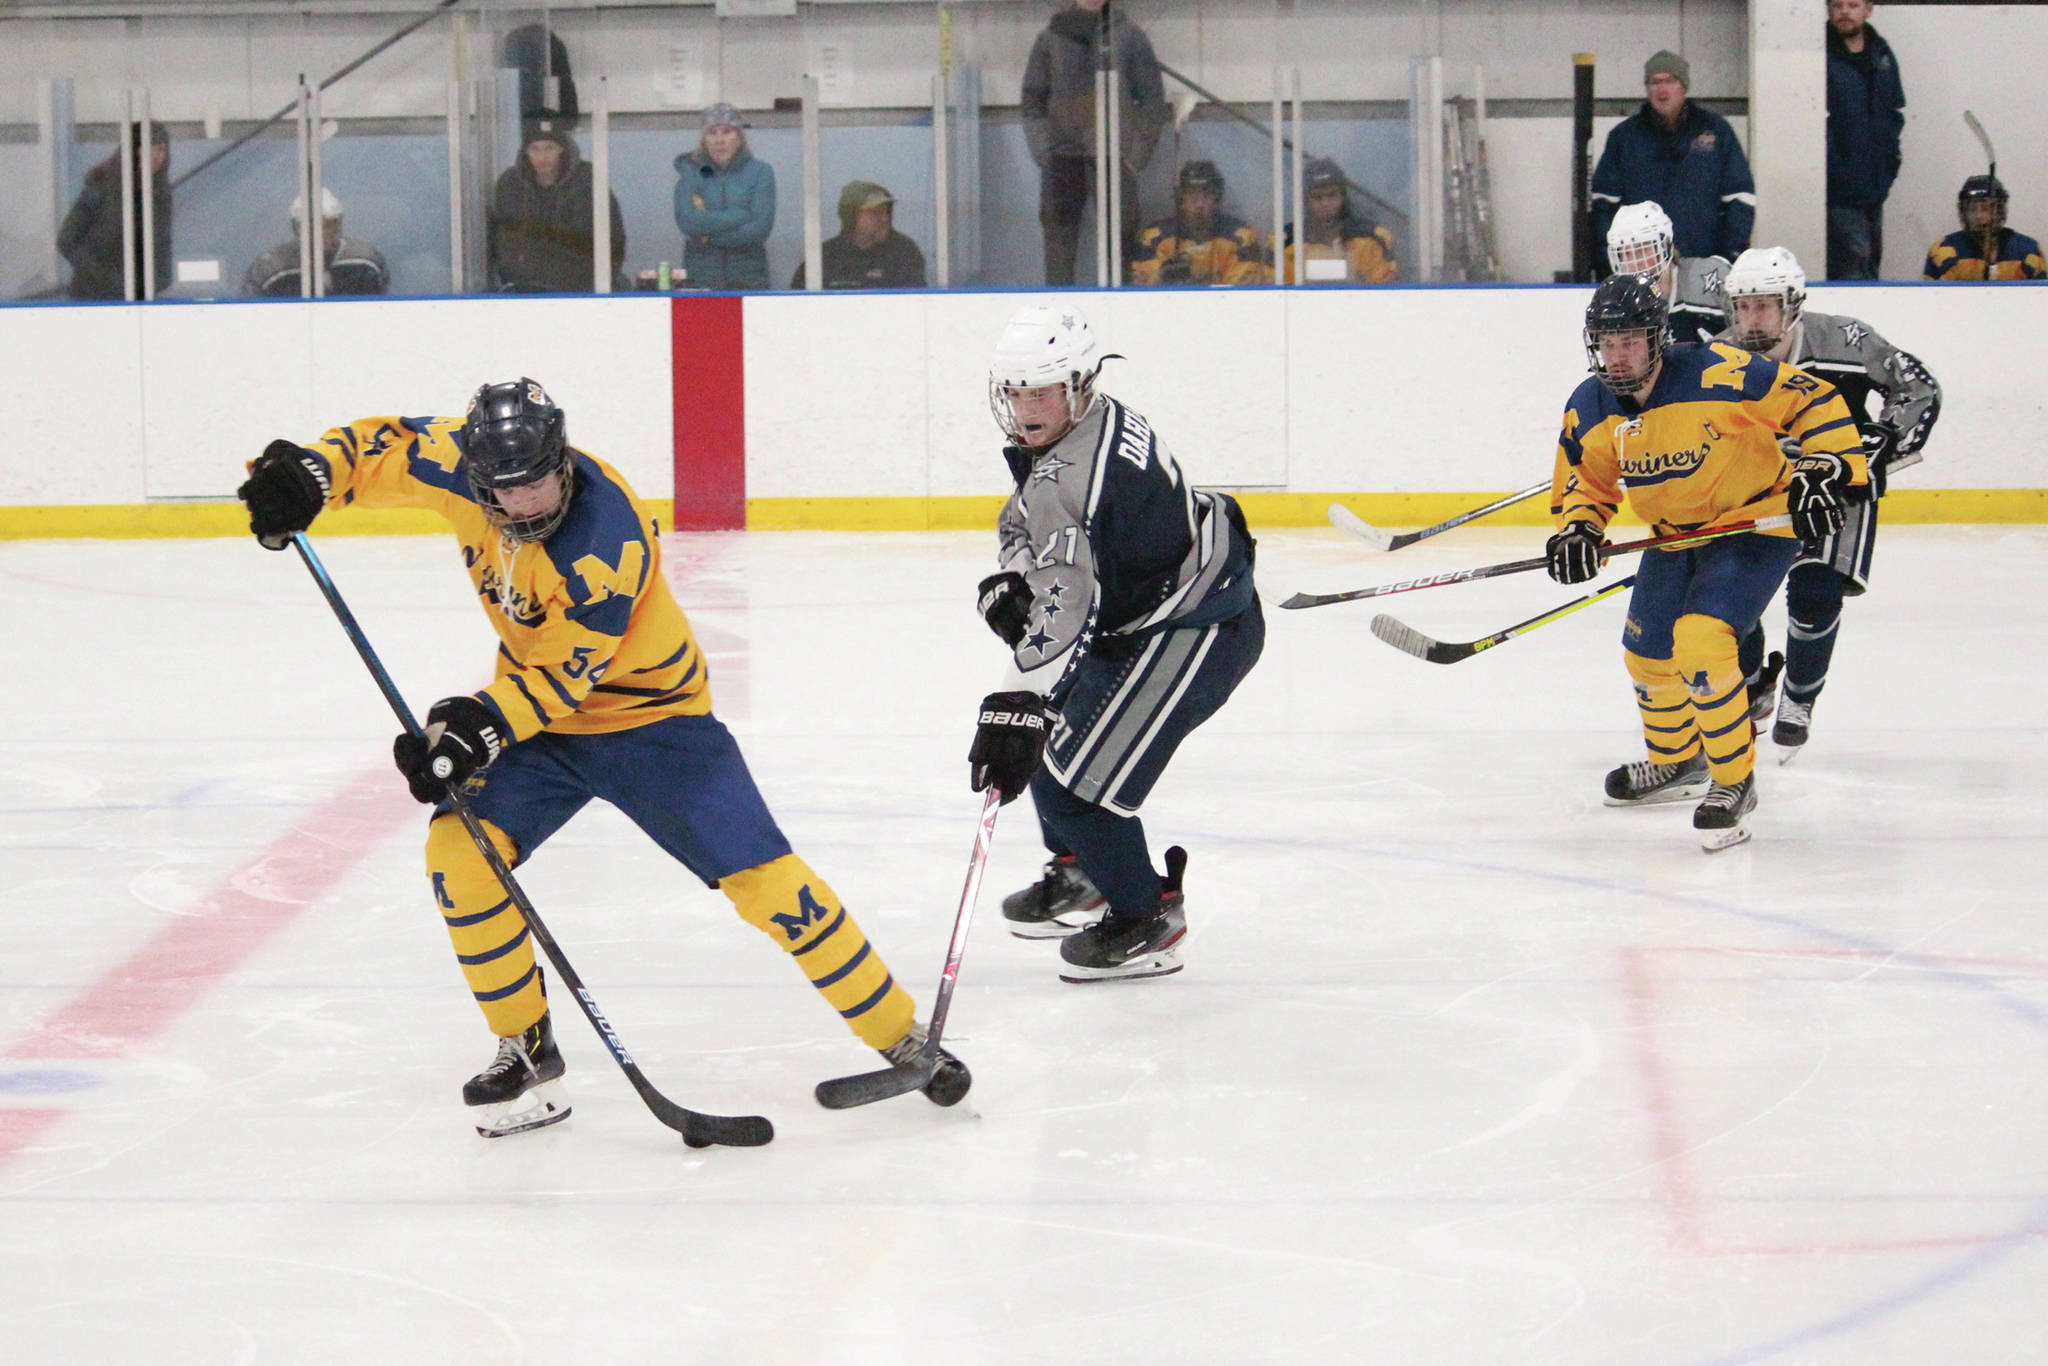 Homer hockey team wins End of the Road Shootout